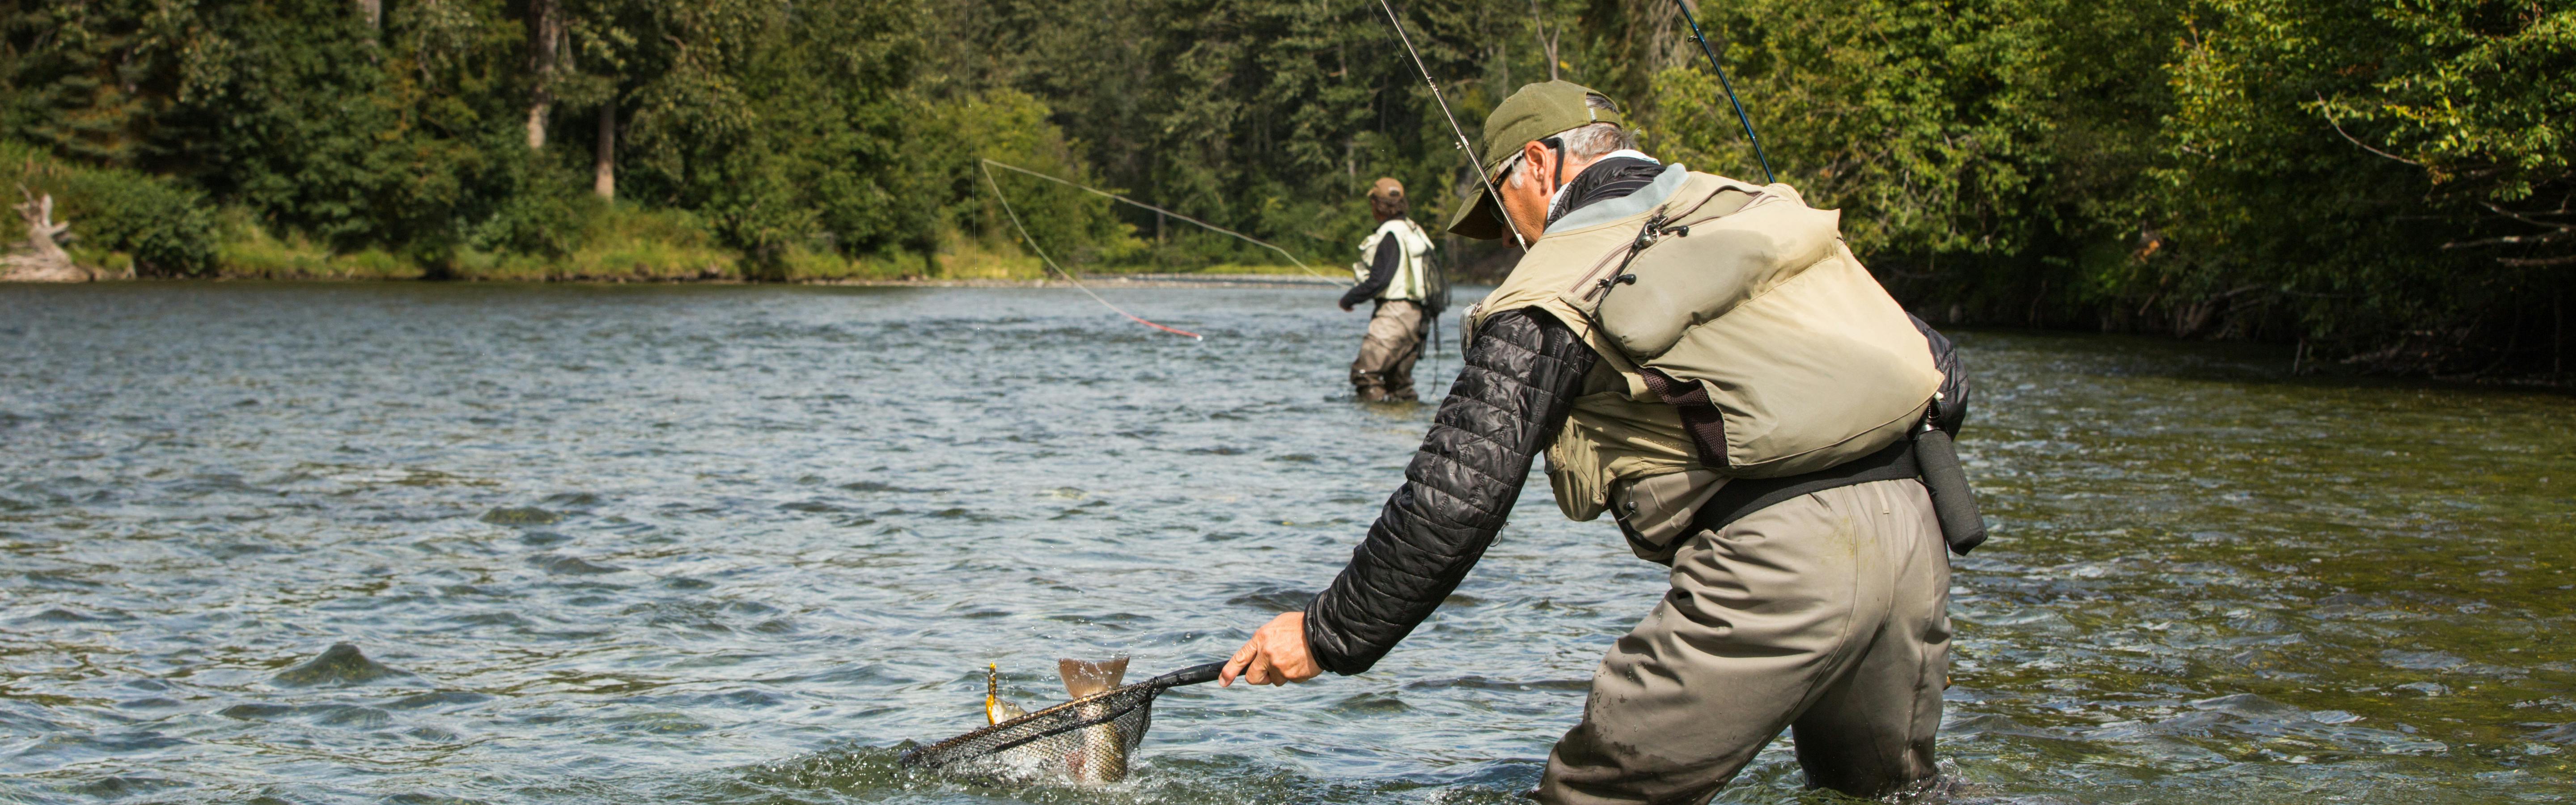 The 6 Most Recommended Fly Fishing Jackets